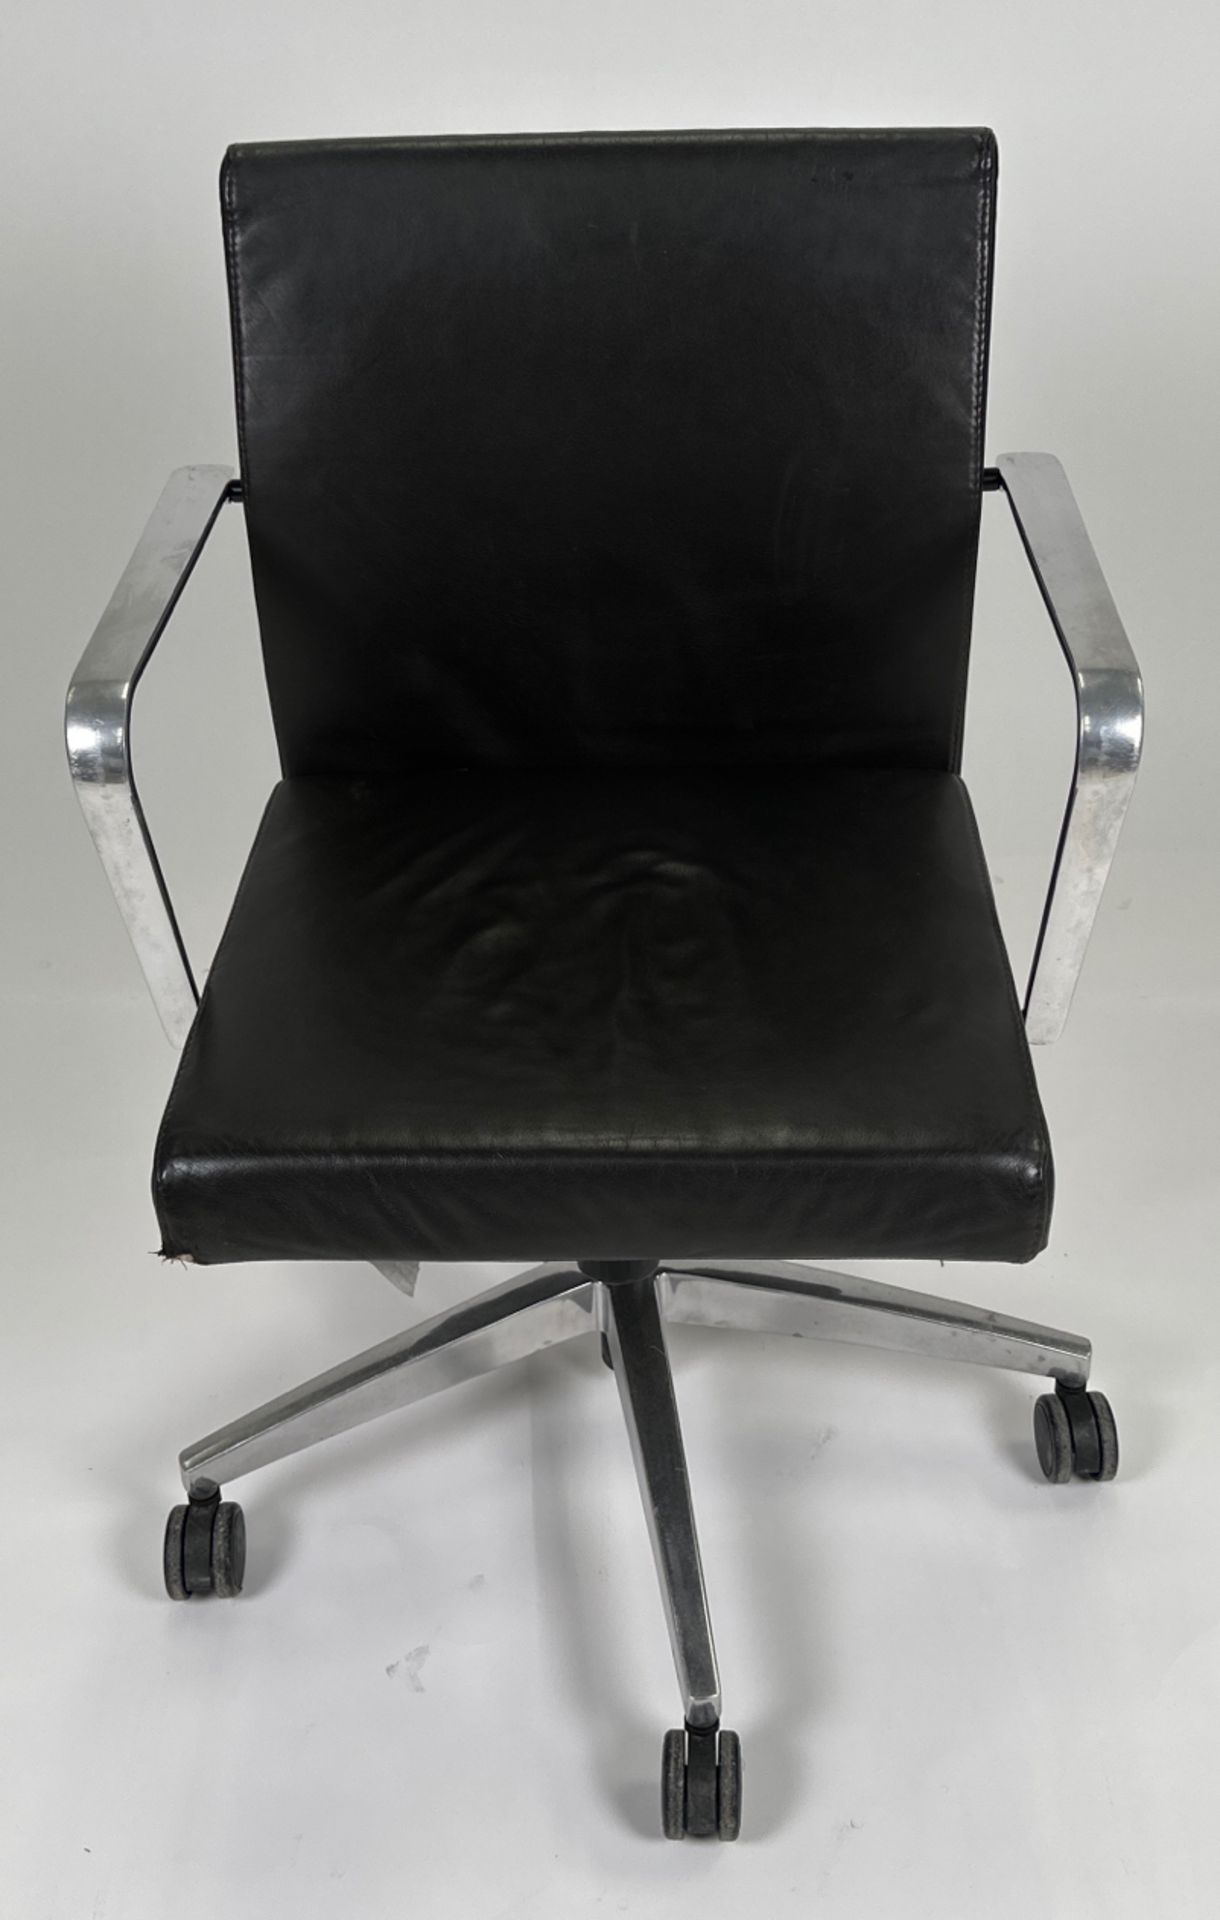 Keilhauer Adjustable Leather Office Chair - Image 3 of 3